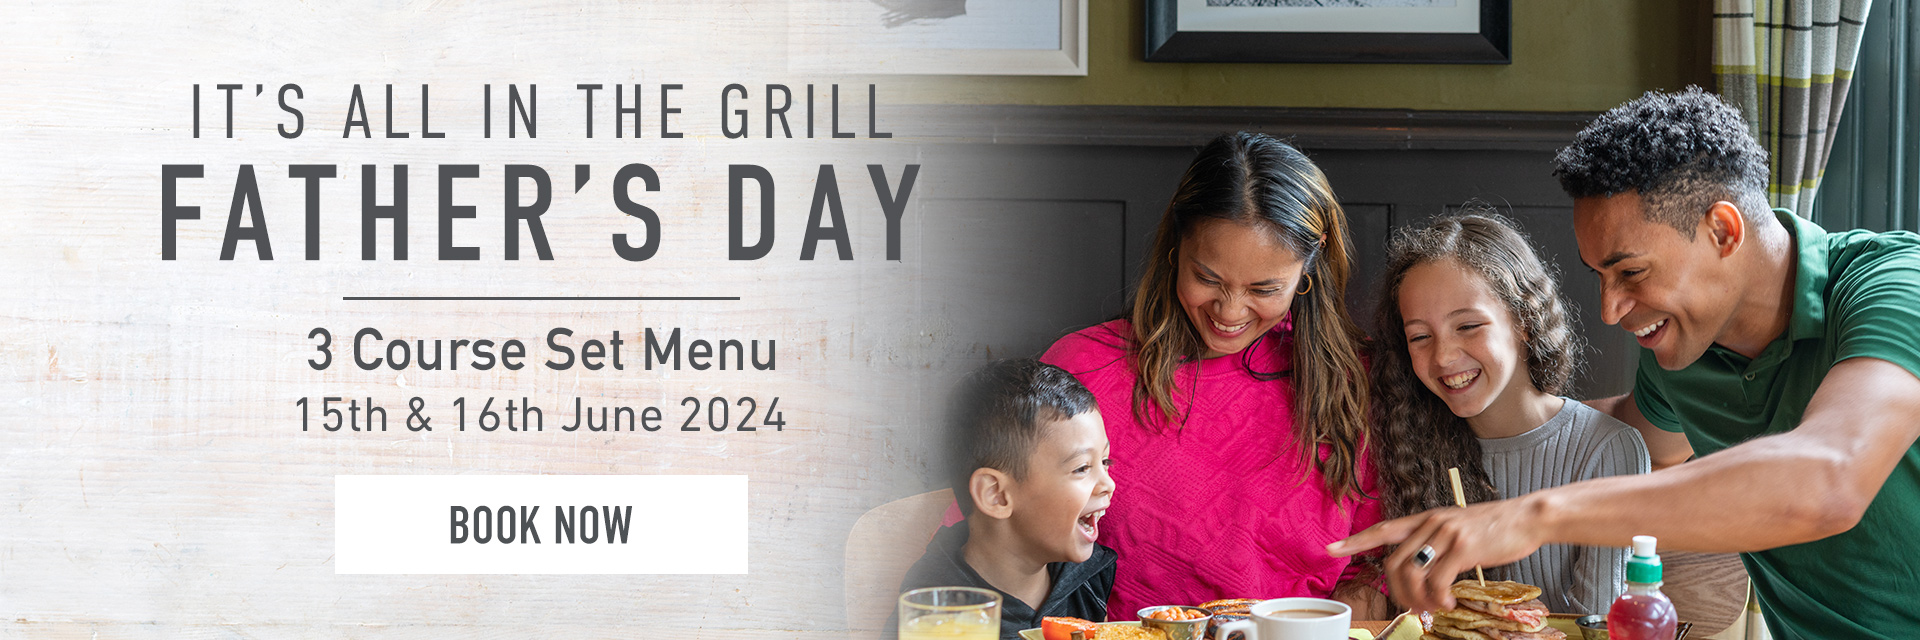 Father’s Day at Harvester Ravenswood